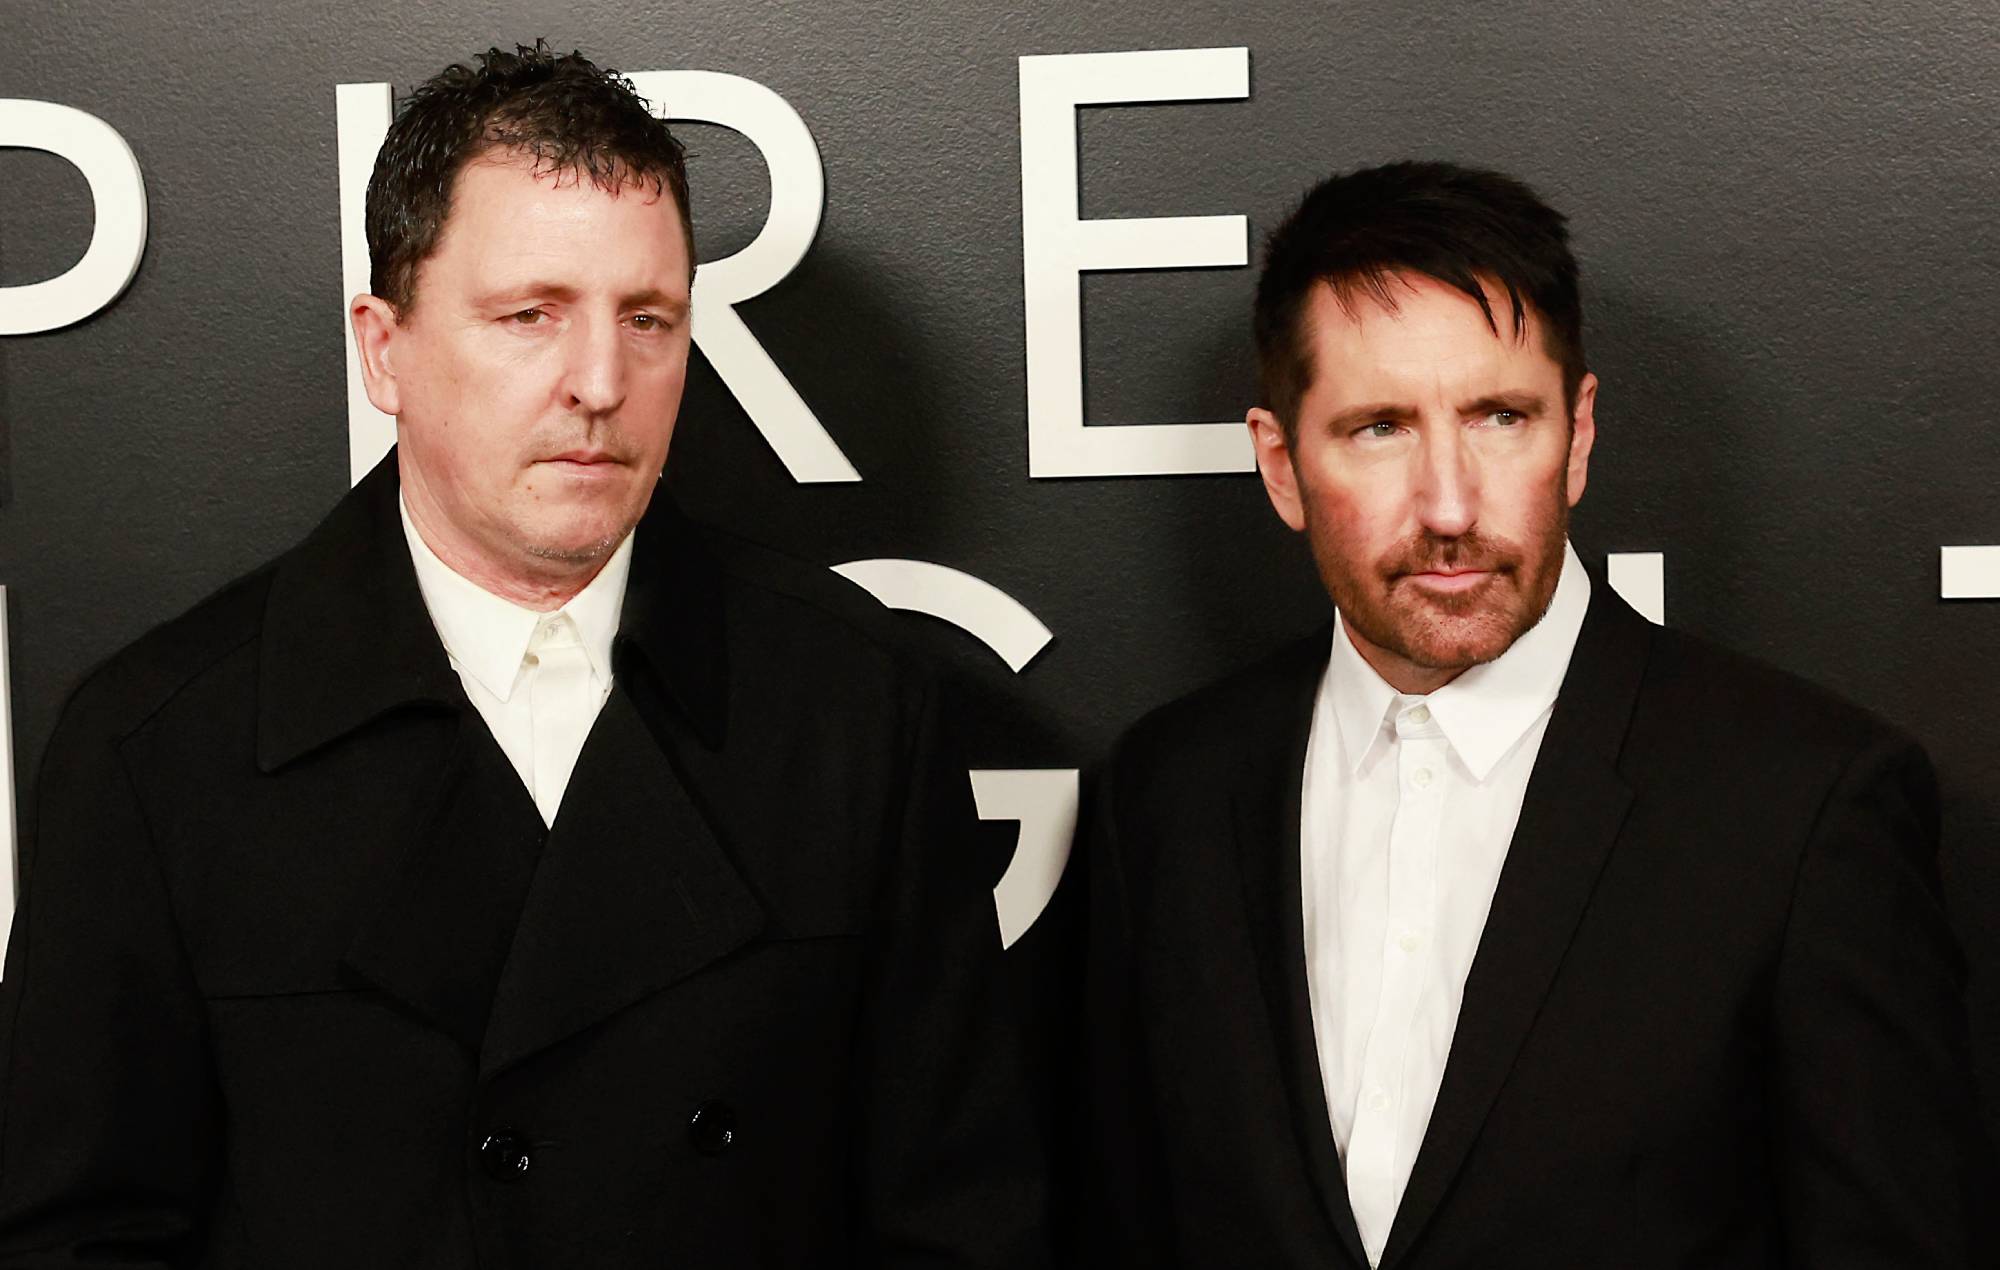 Nine Inch Nails share plans for new album, music festival, TV show, XR game and clothing line